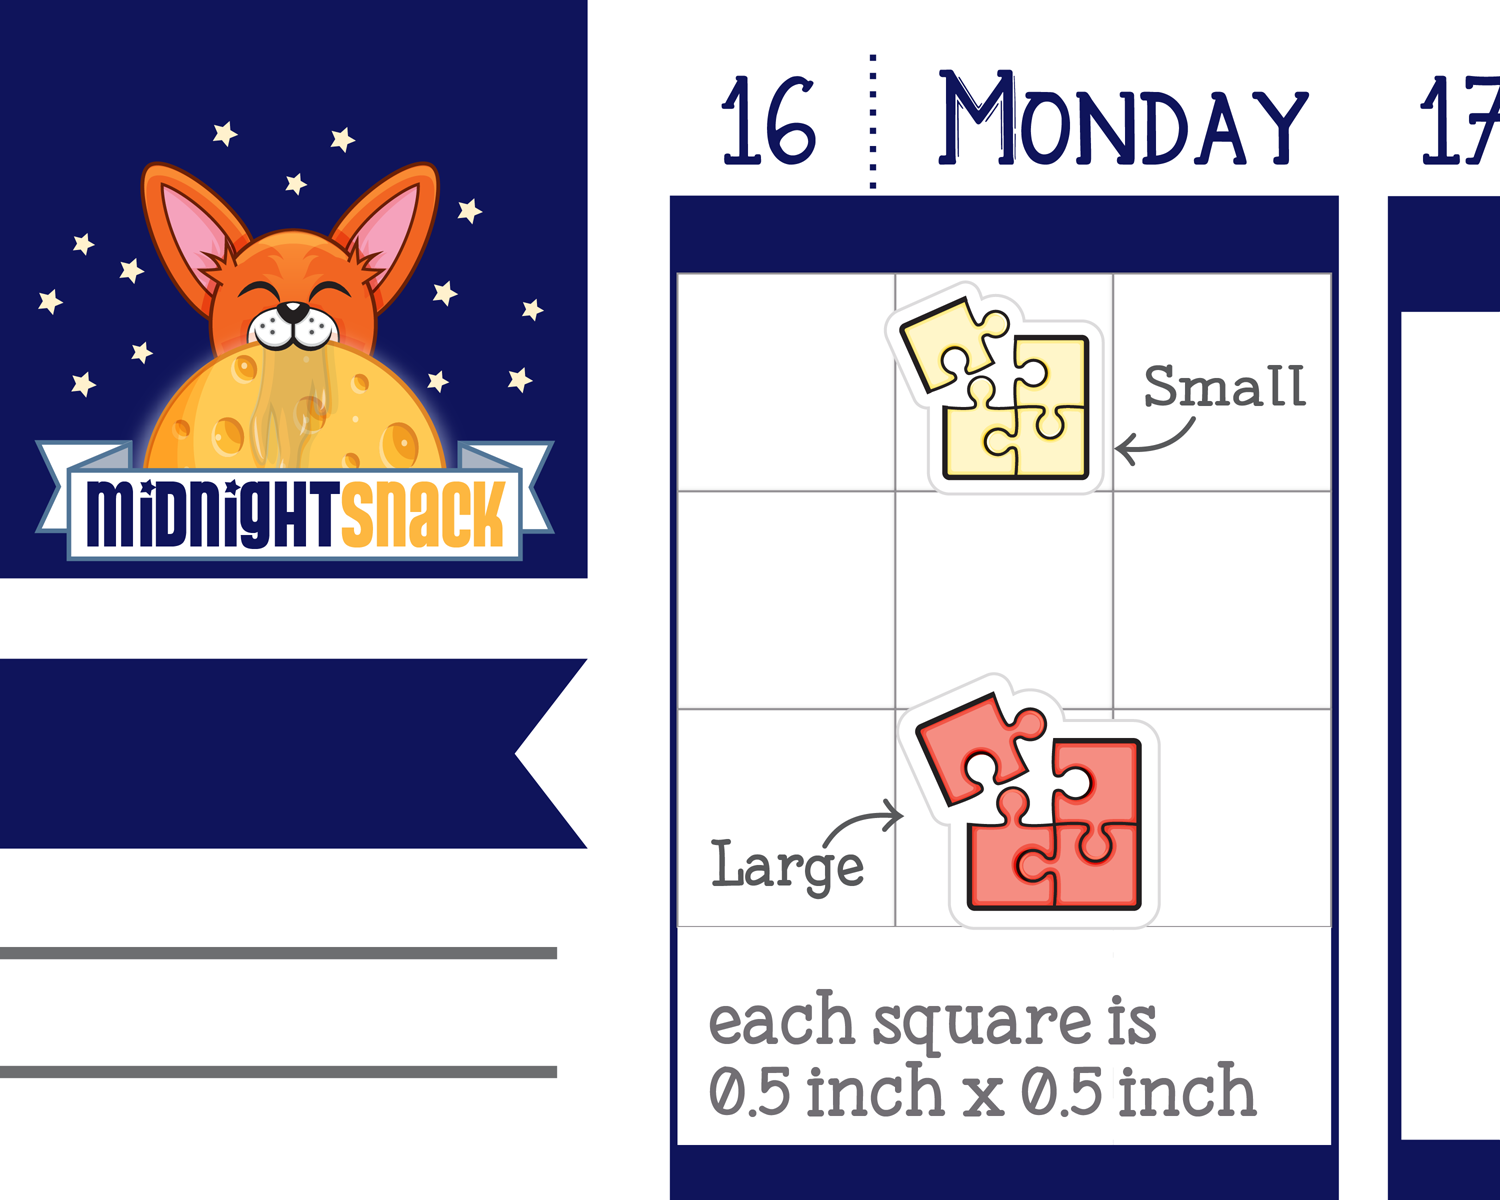 Puzzle Icon: Fun and Games Planner Stickers